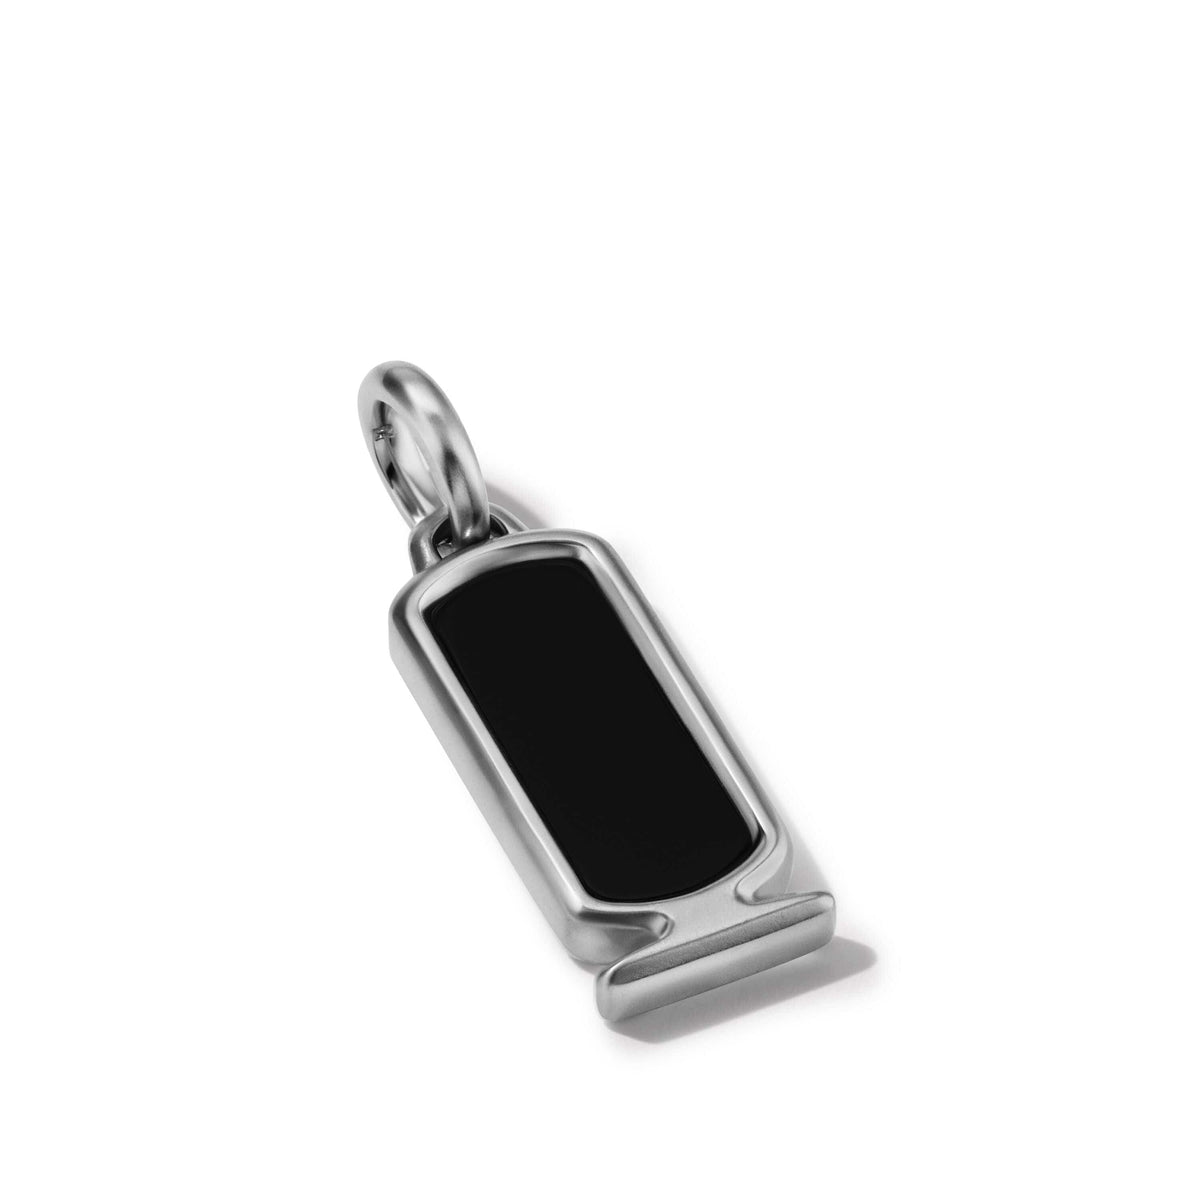 Cairo Cartouche Amulet in Sterling Silver with Black Onyx